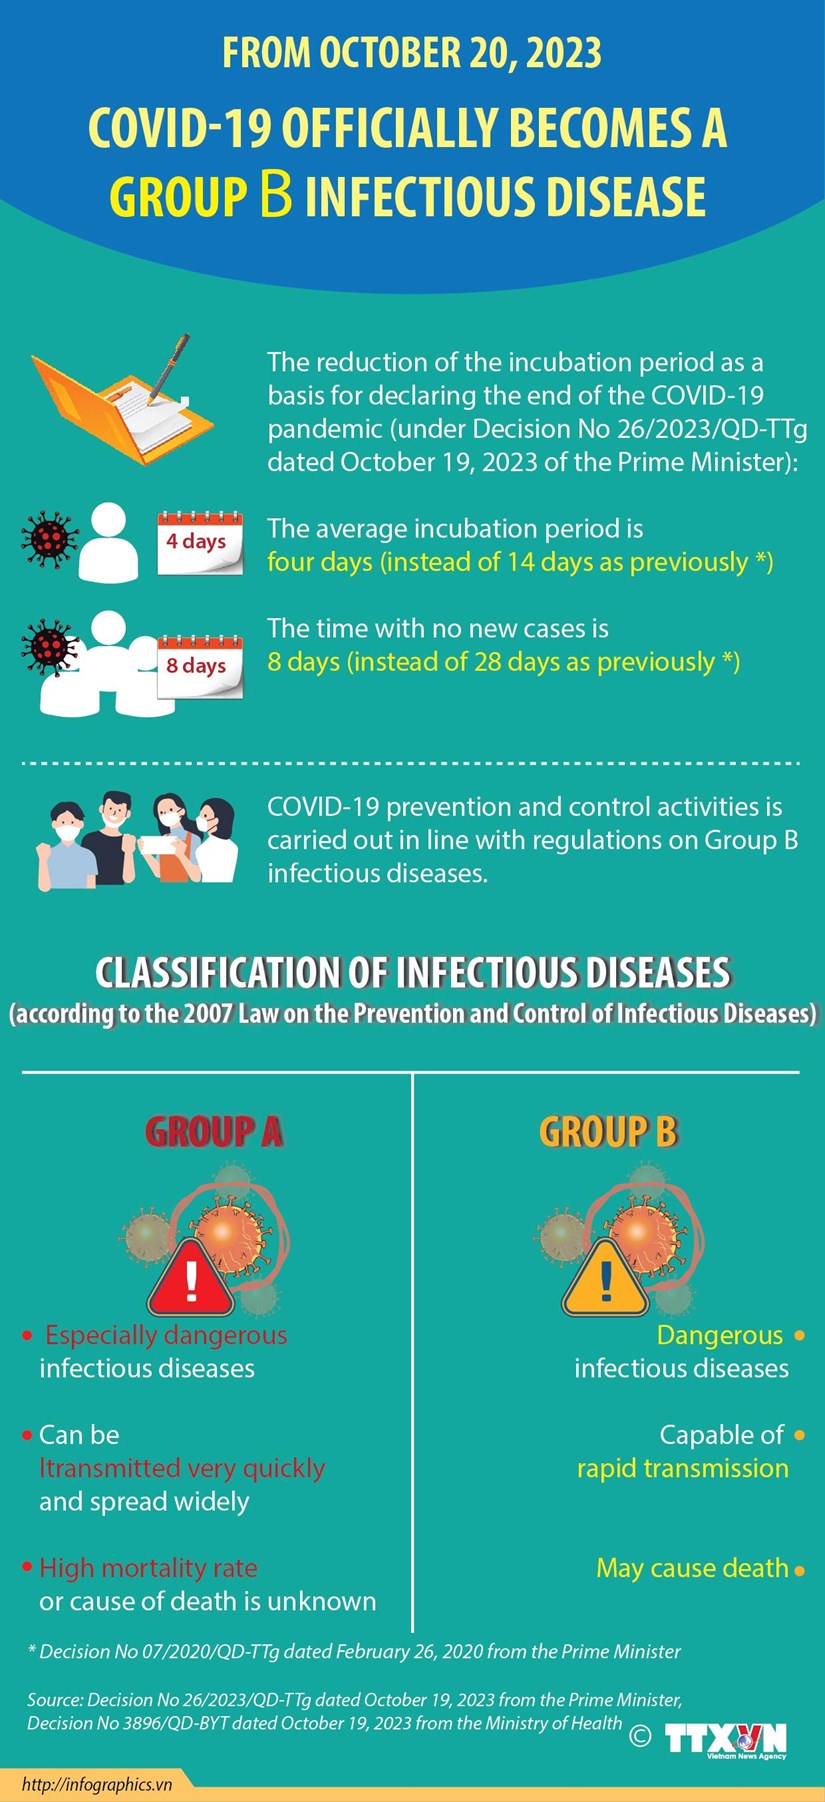 COVID-19 officially becomes Group B infectious disease hinh anh 1